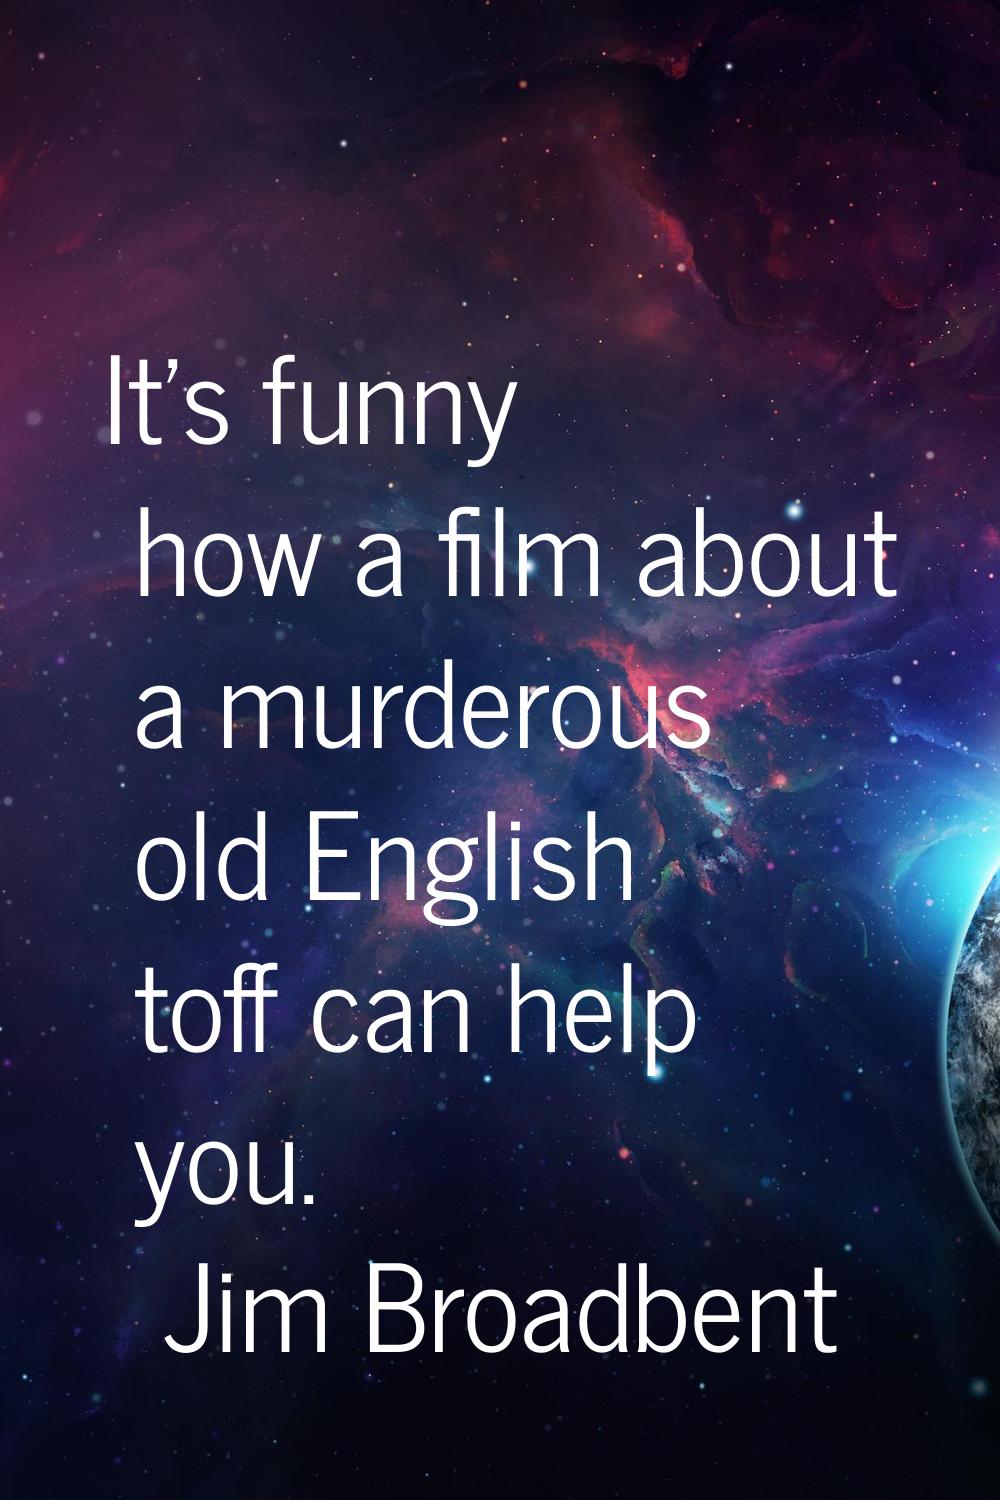 It's funny how a film about a murderous old English toff can help you.